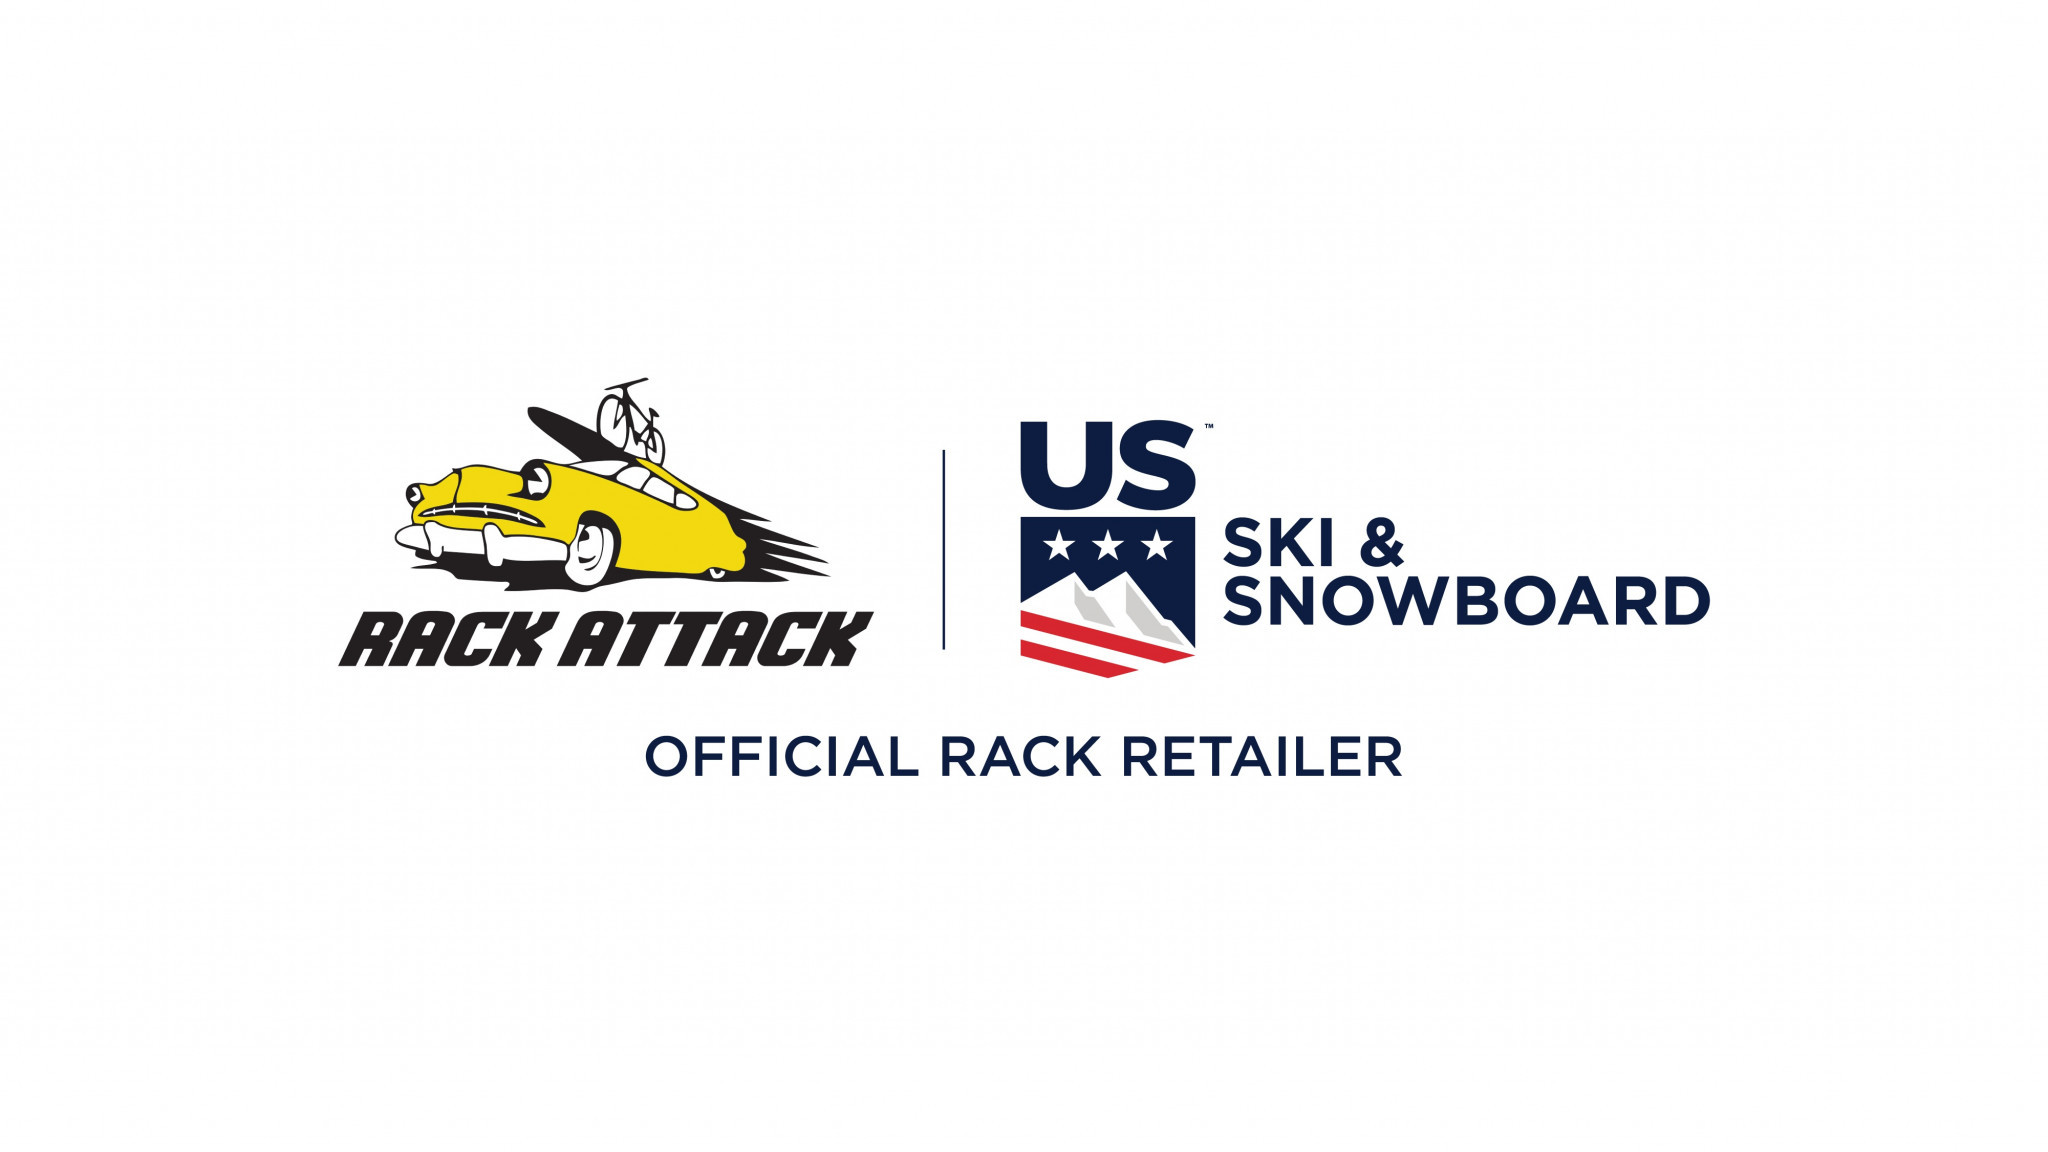 Rack Attack has been named as the official rack retailer for US Ski and Snowboard ©US Ski and Snowboard